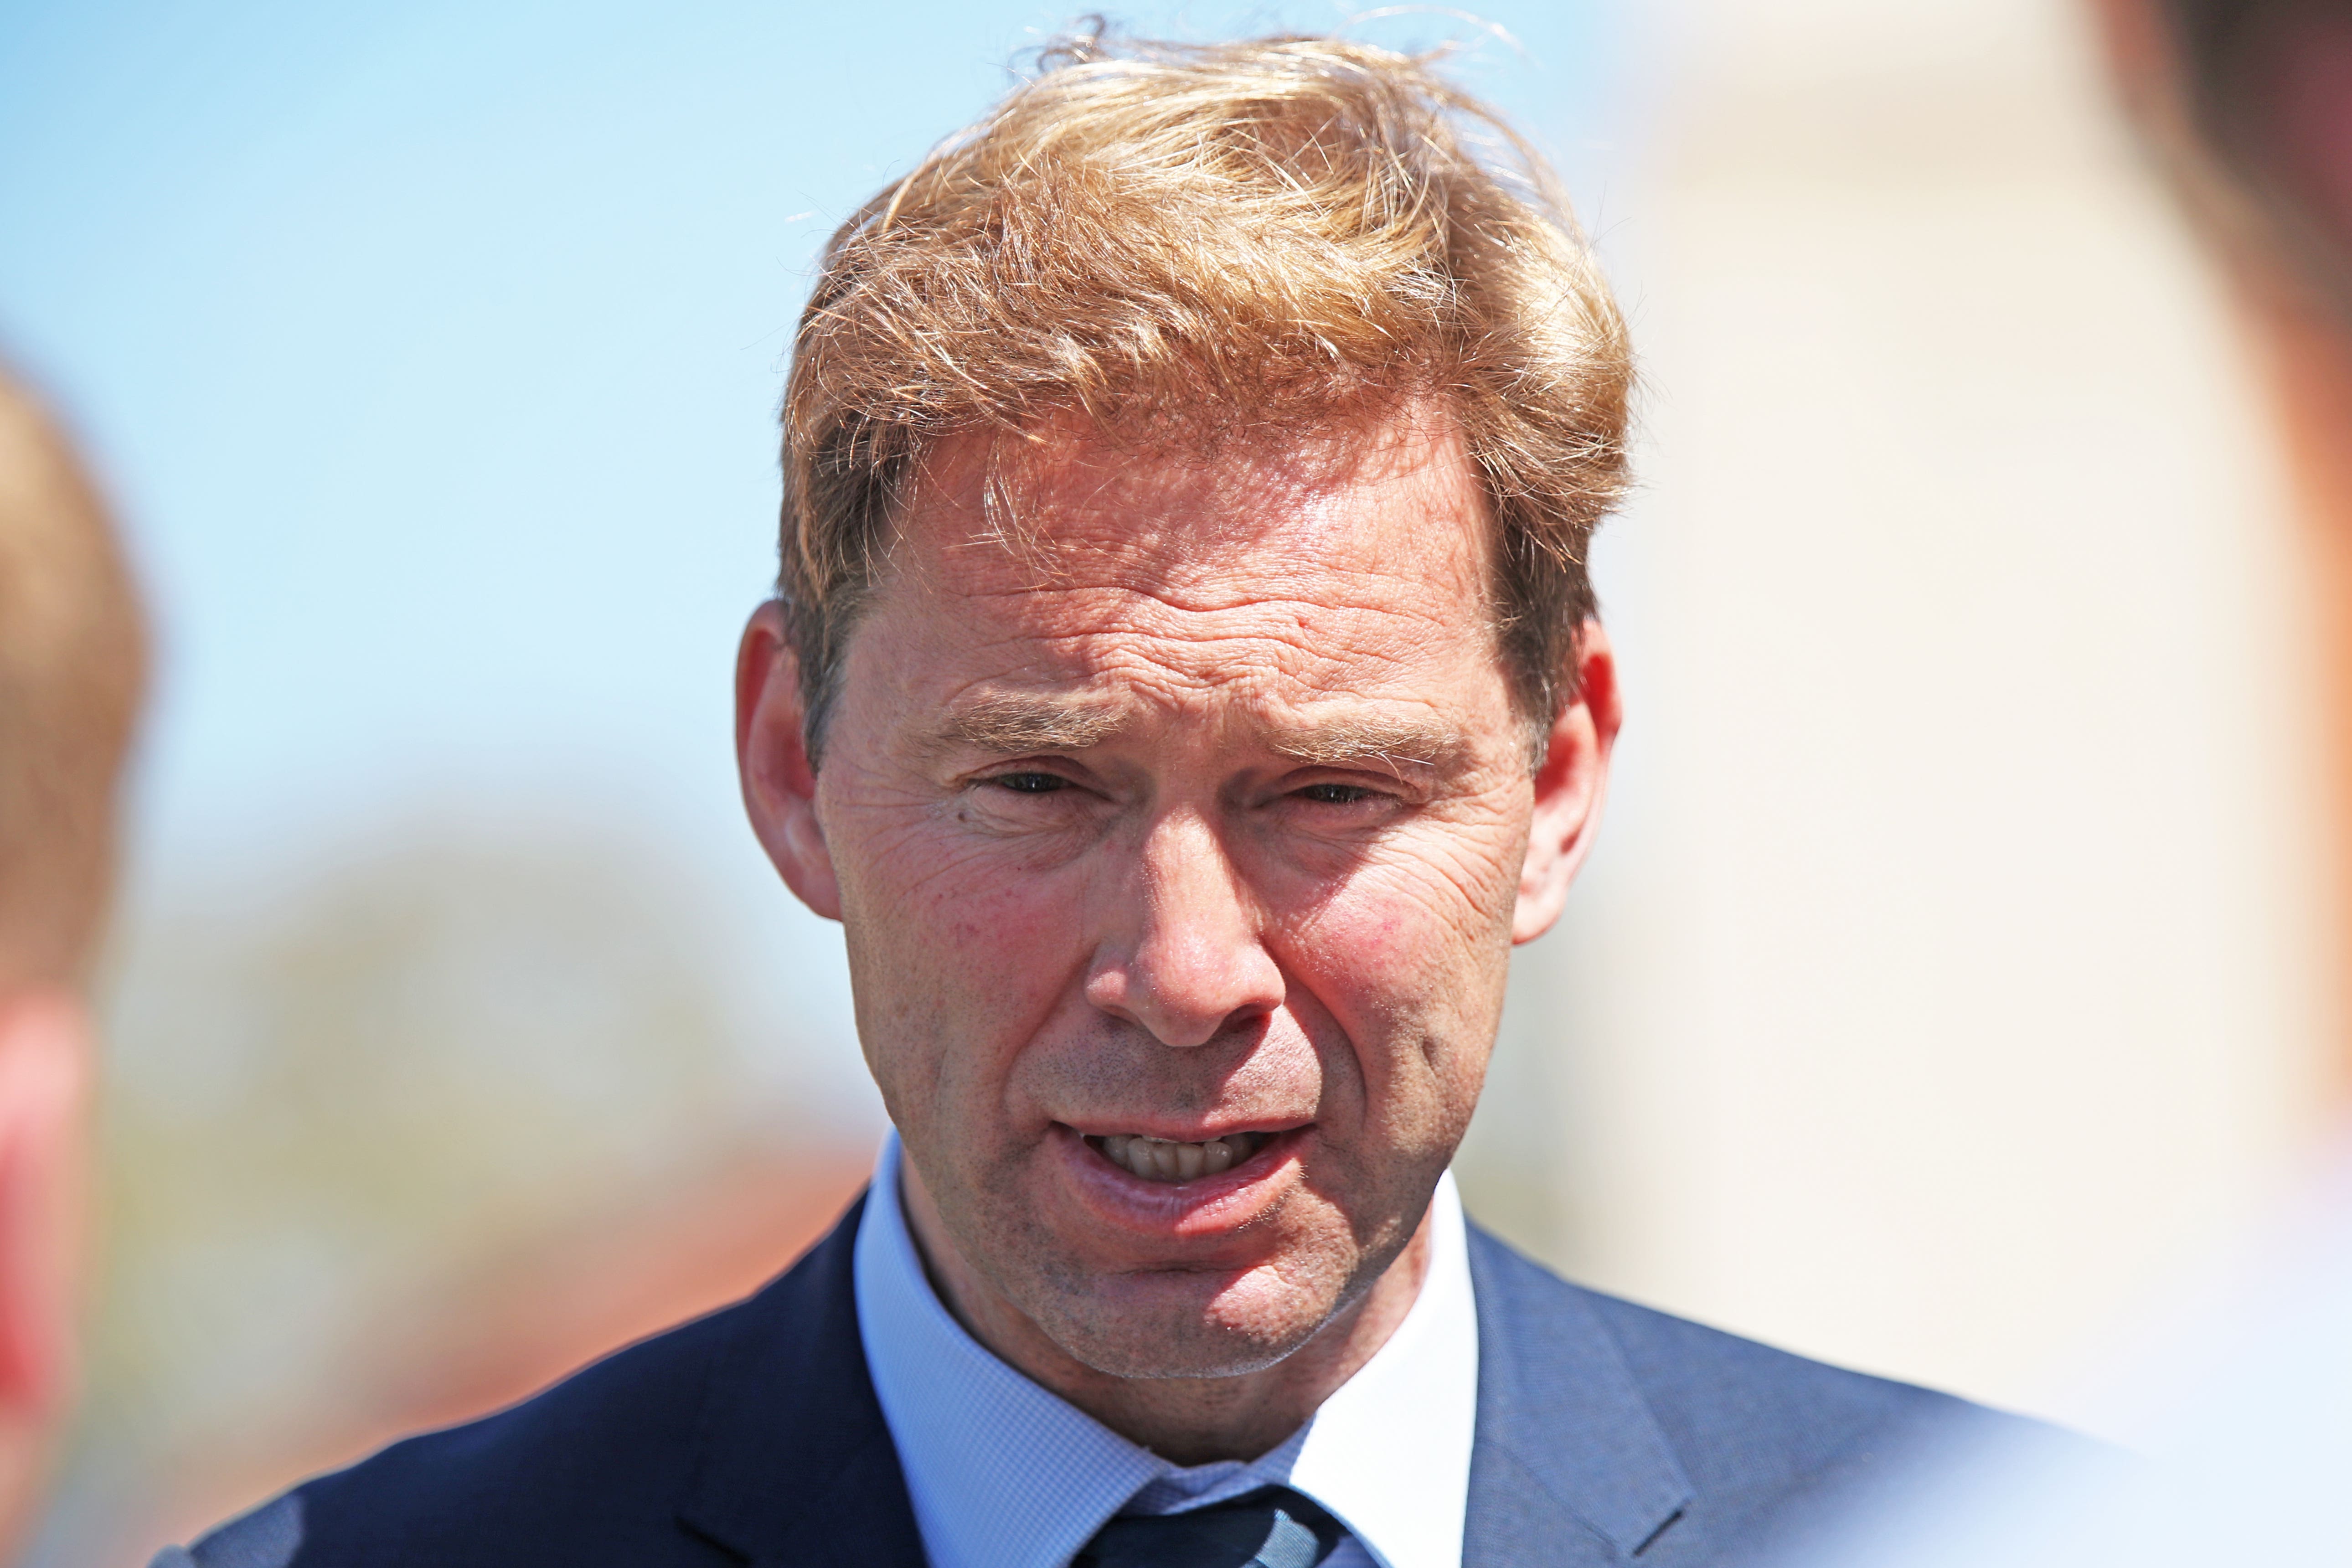 The case ‘illustrates the gaping hole in the current system’, said Tobias Ellwood